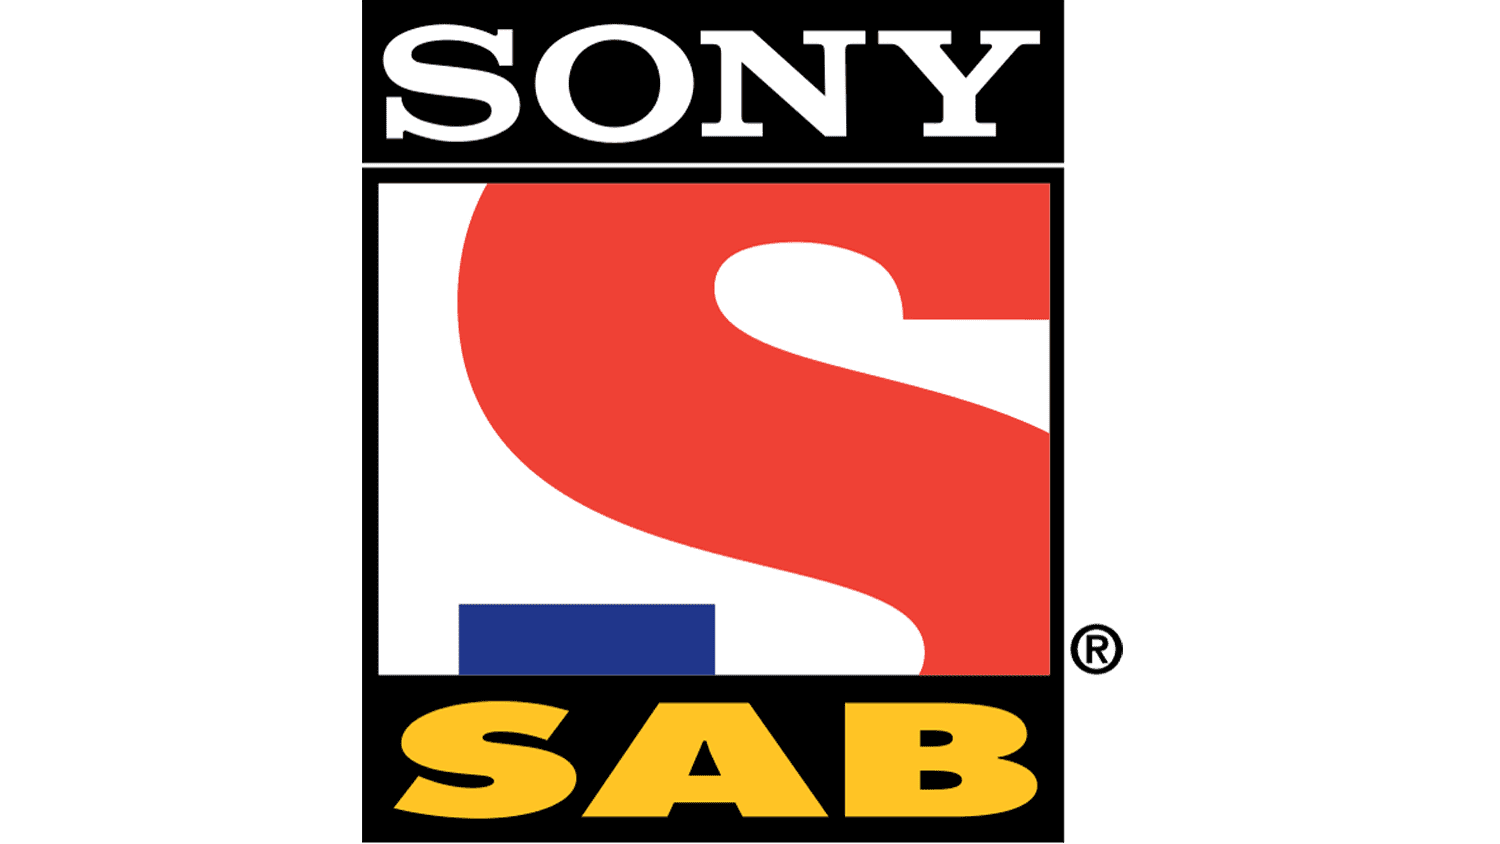 Download Sony Sab Television Channel Logo Wallpaper | Wallpapers.com